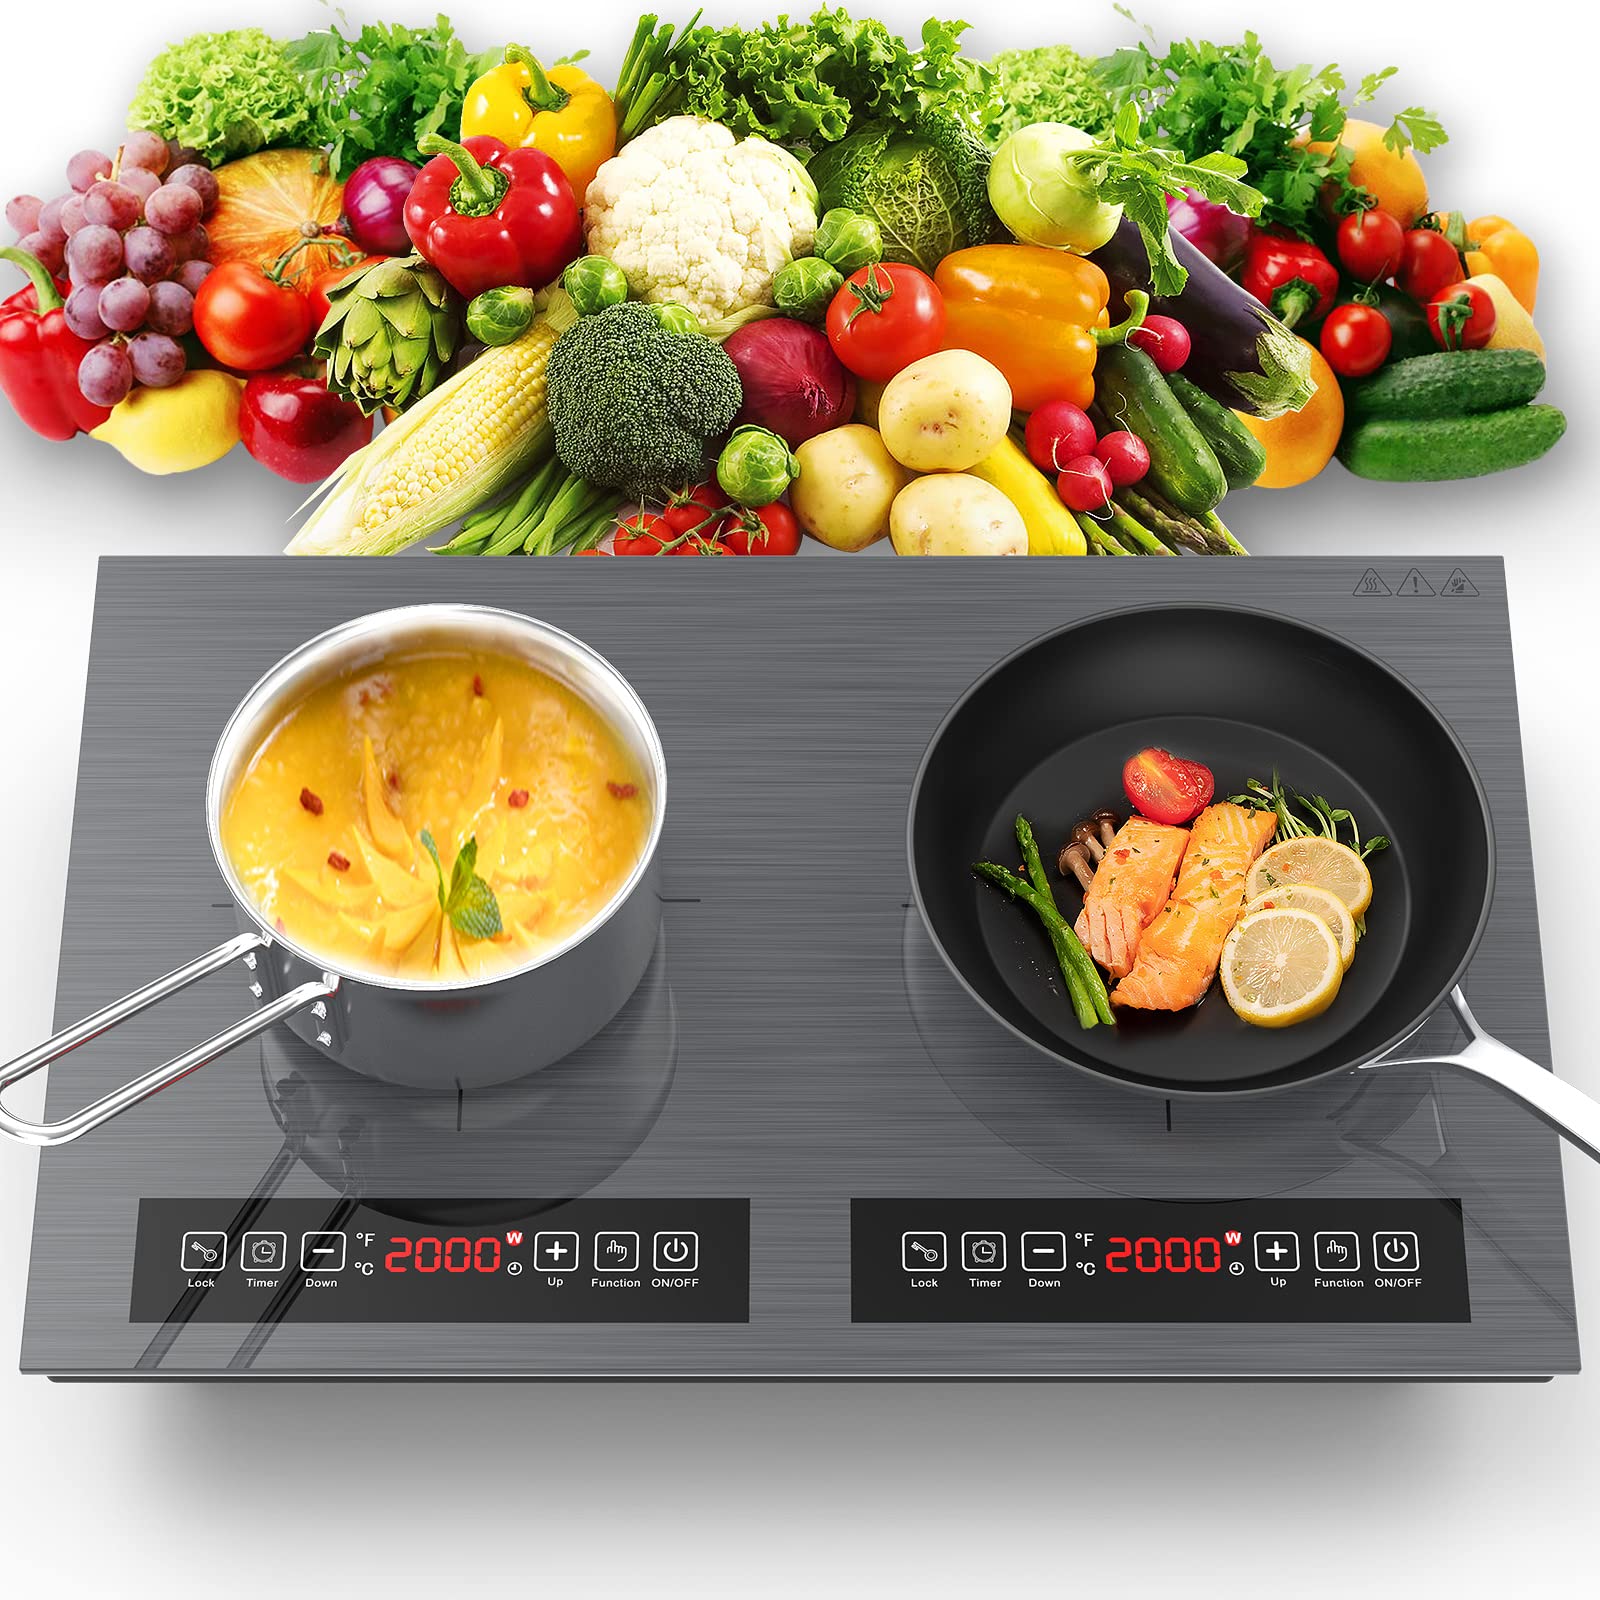 GTKZW Induction cooktop, 110V Electric cooktop 24 inch, LED Touch Screen Burner, Overheat Protection Function Hot Plate, 9 Temperature